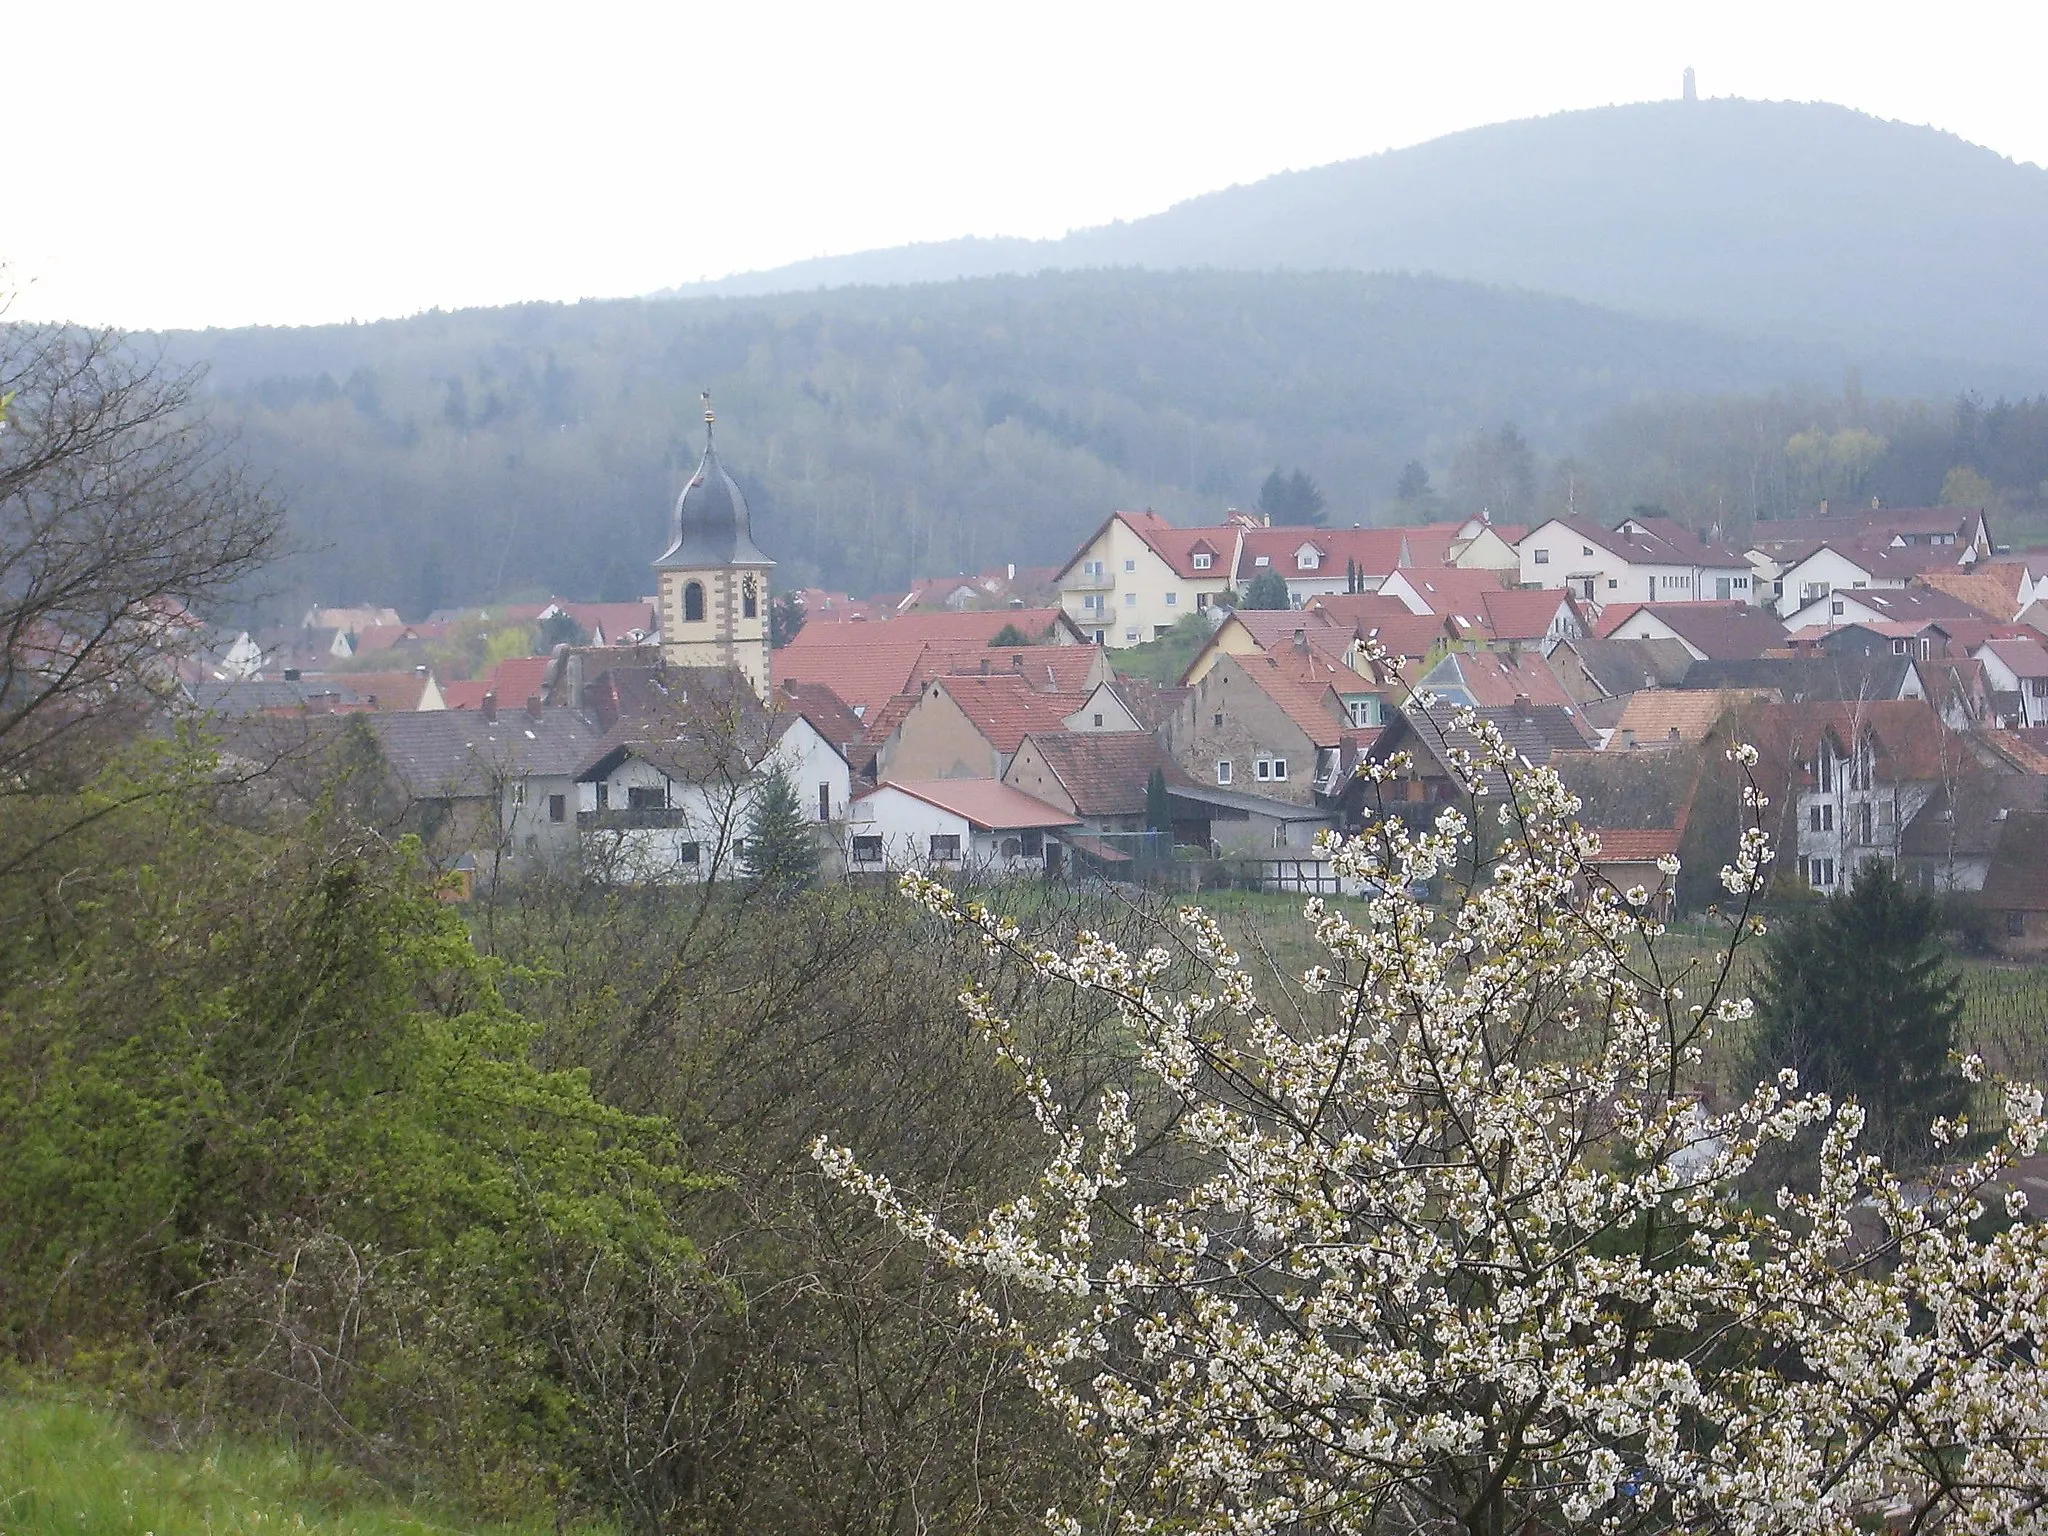 Photo showing: The village of Leistadt beginning of April 2007. The photograph was taken from the apple tree gardens of the 'Berntal' (north-east of Leistadt). On the top of the mountain the 'Bismark tower' is visible.